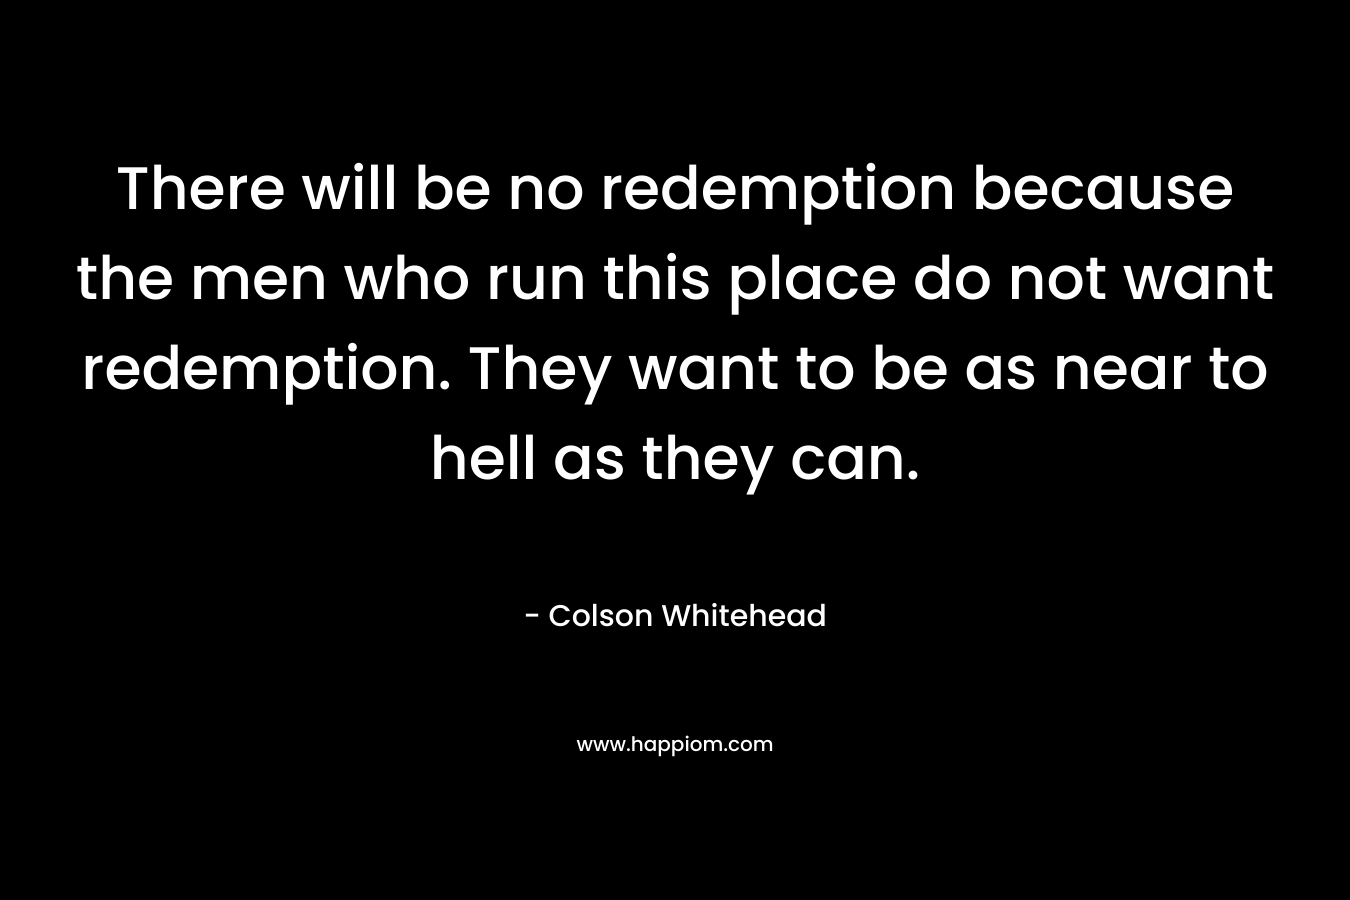 There will be no redemption because the men who run this place do not want redemption. They want to be as near to hell as they can. – Colson Whitehead